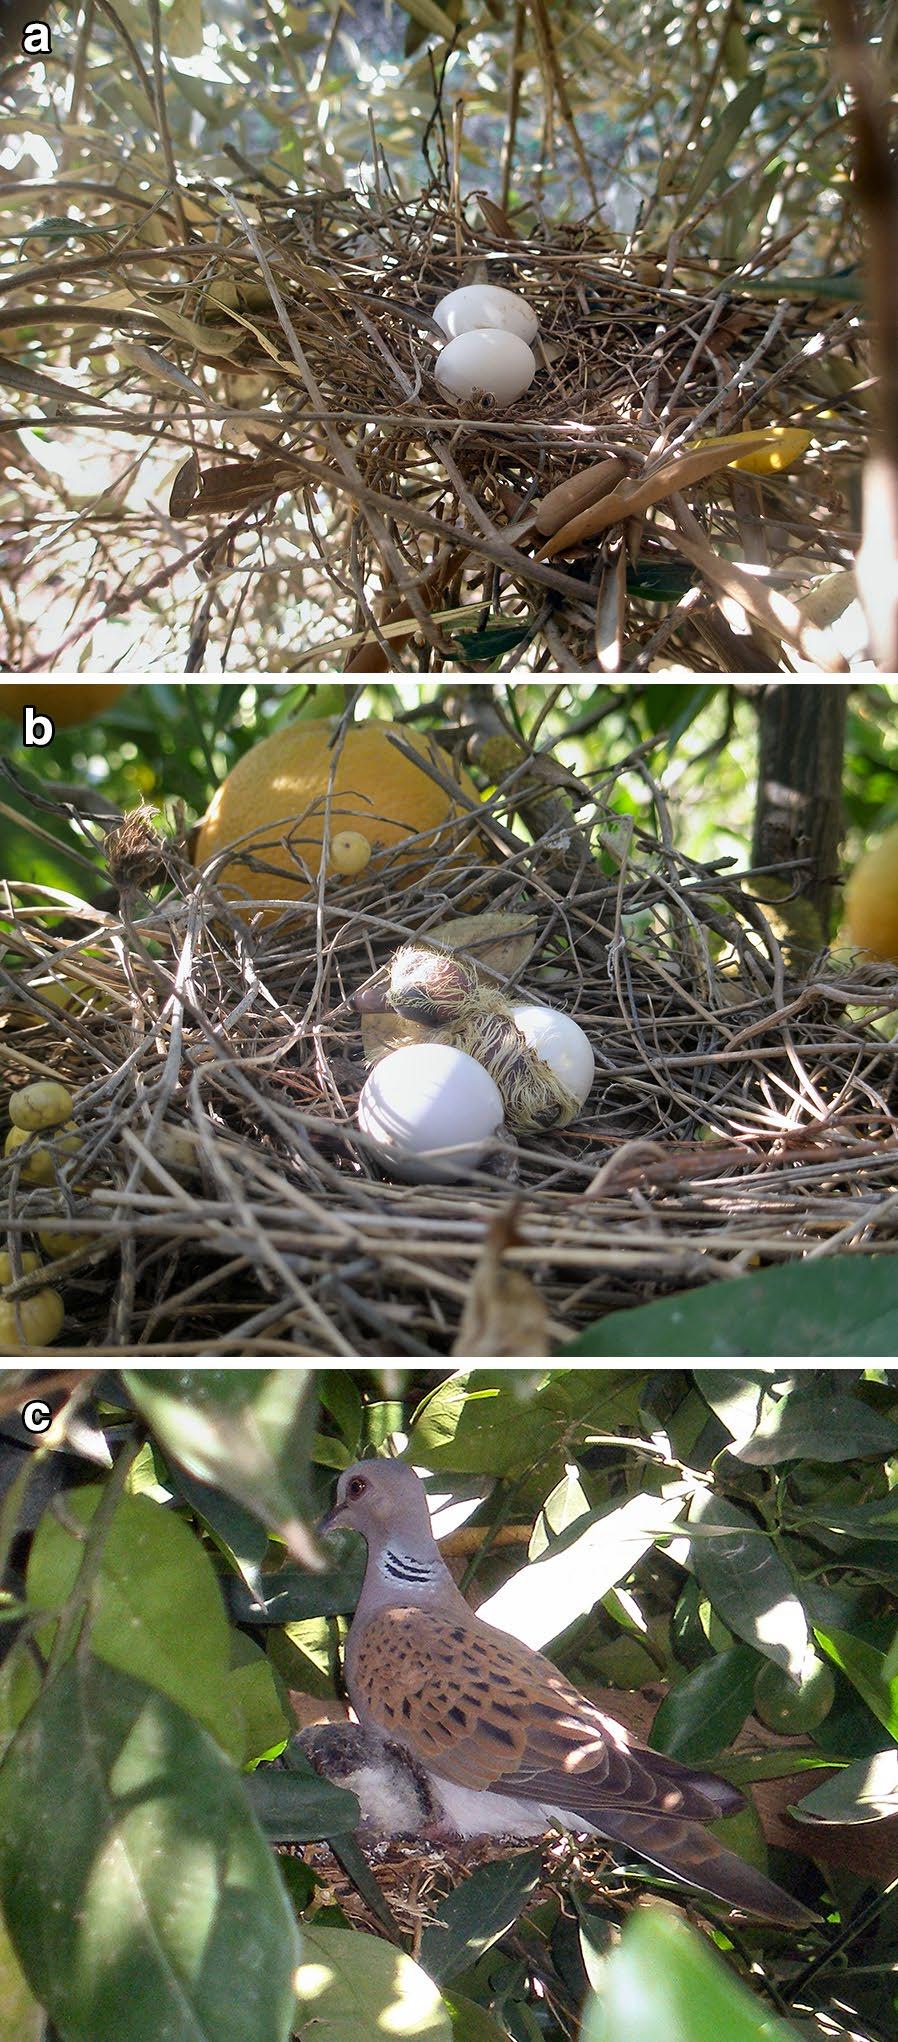 Page 5 of 11 Fig. 2 a A nest of a Turtle Dove with two eggs on an olive tree. b A nest of Turtle Dove with a newly hatched chick on an orange tree.